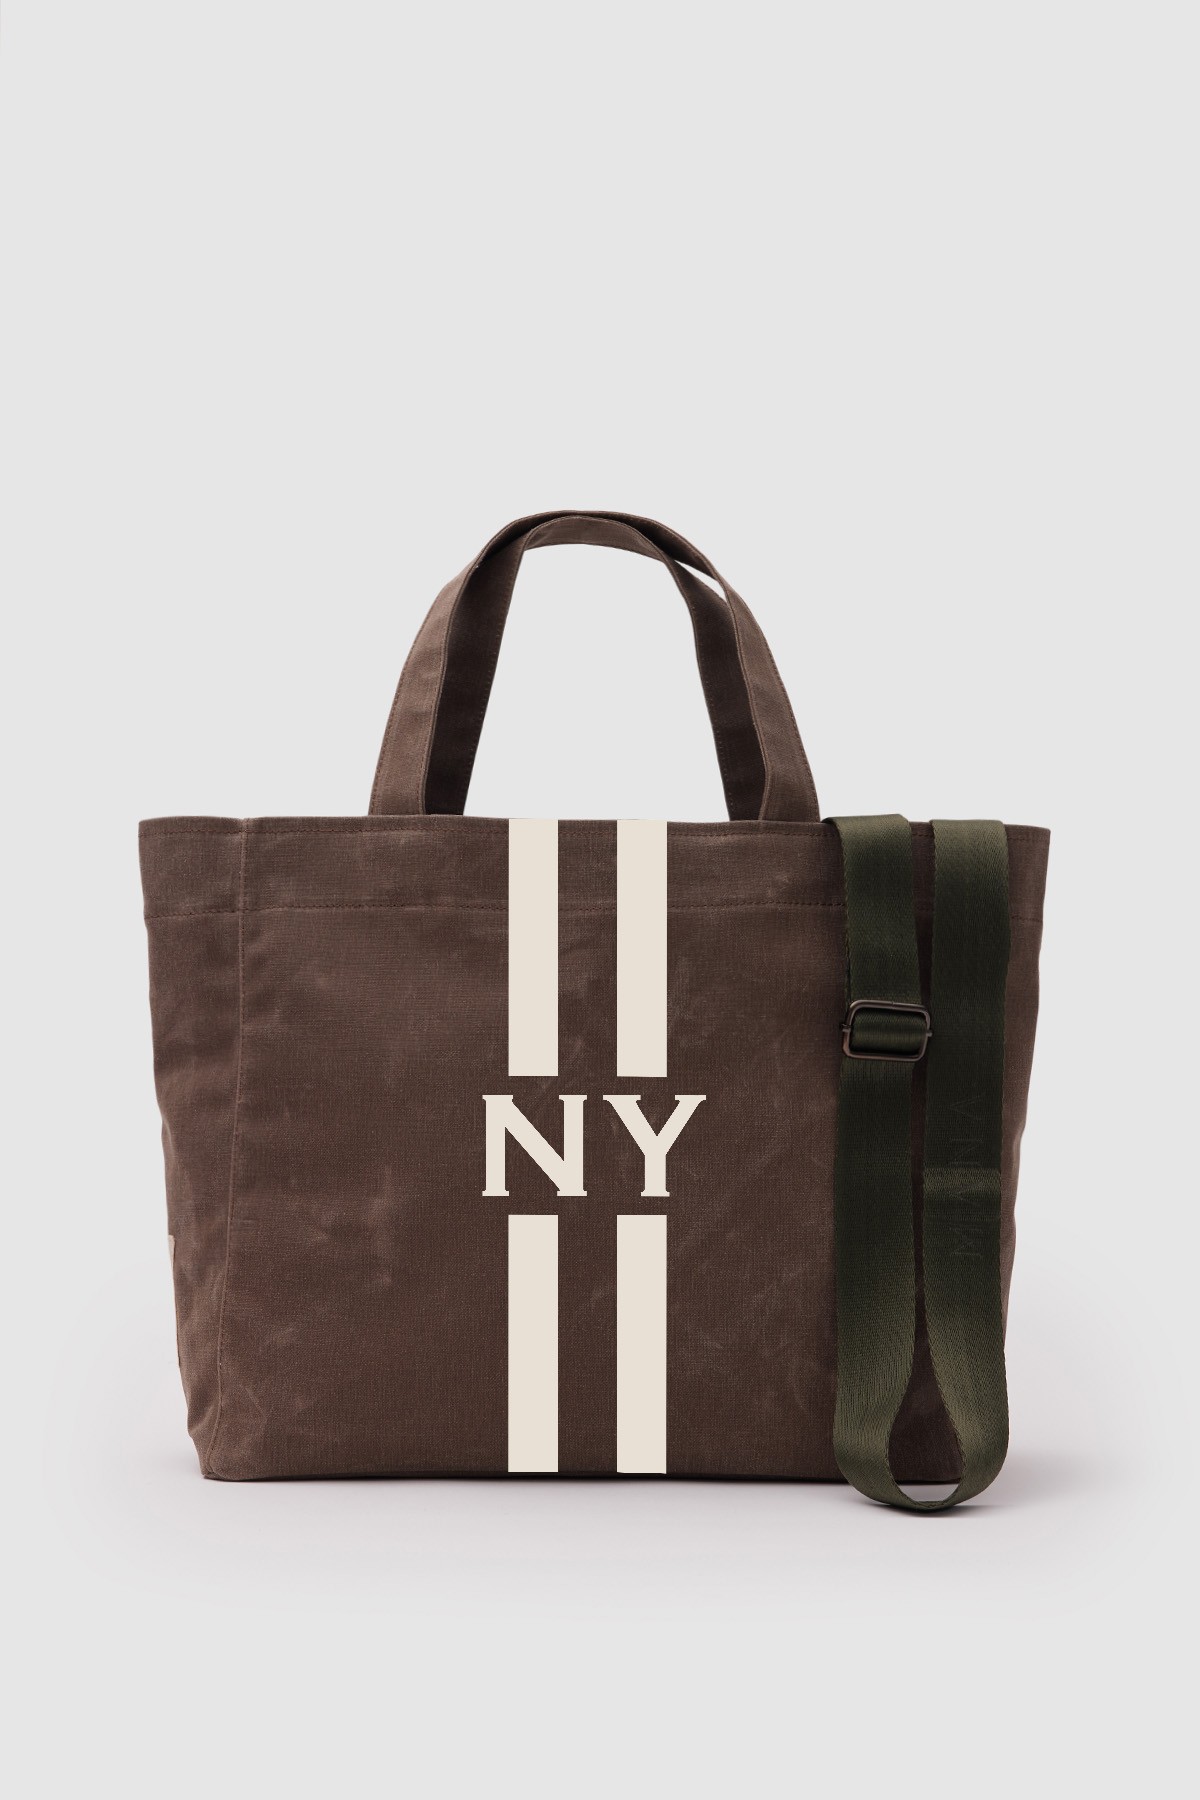 CANVAS BAG 004 XLARGE - DOWNTOWN BROWN